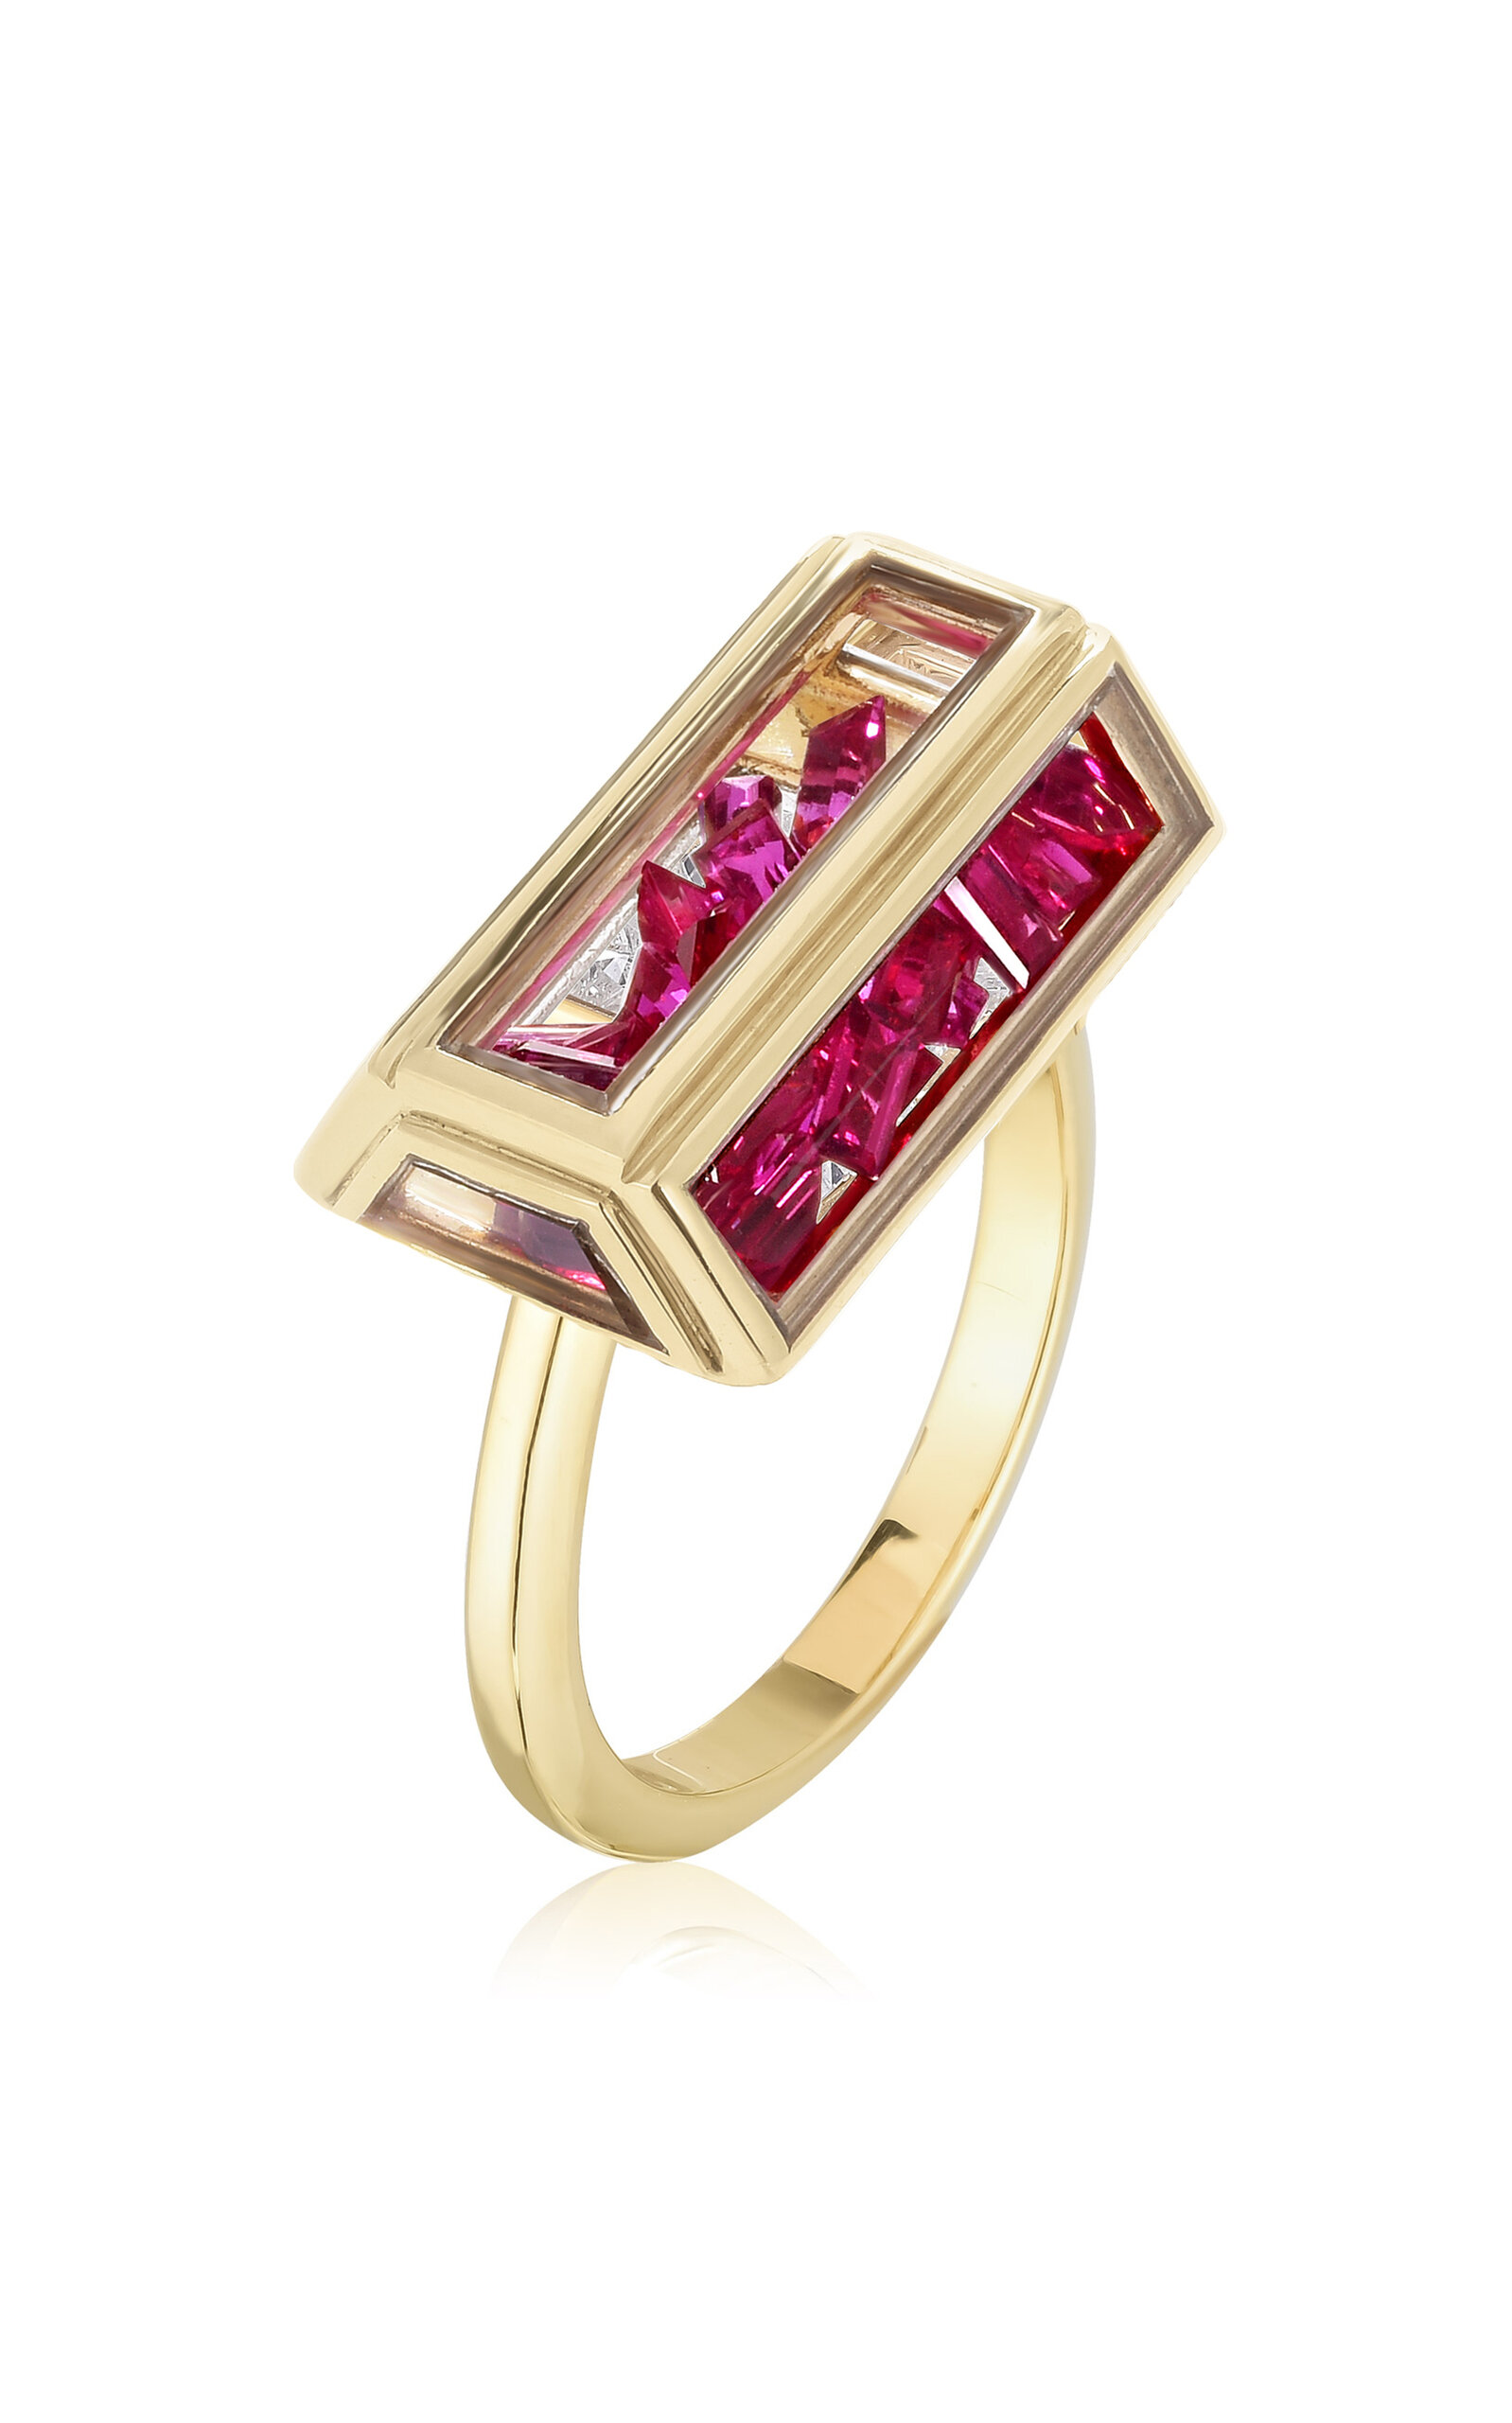 18k Yellow Gold Bau Shaker Ring with Rubies